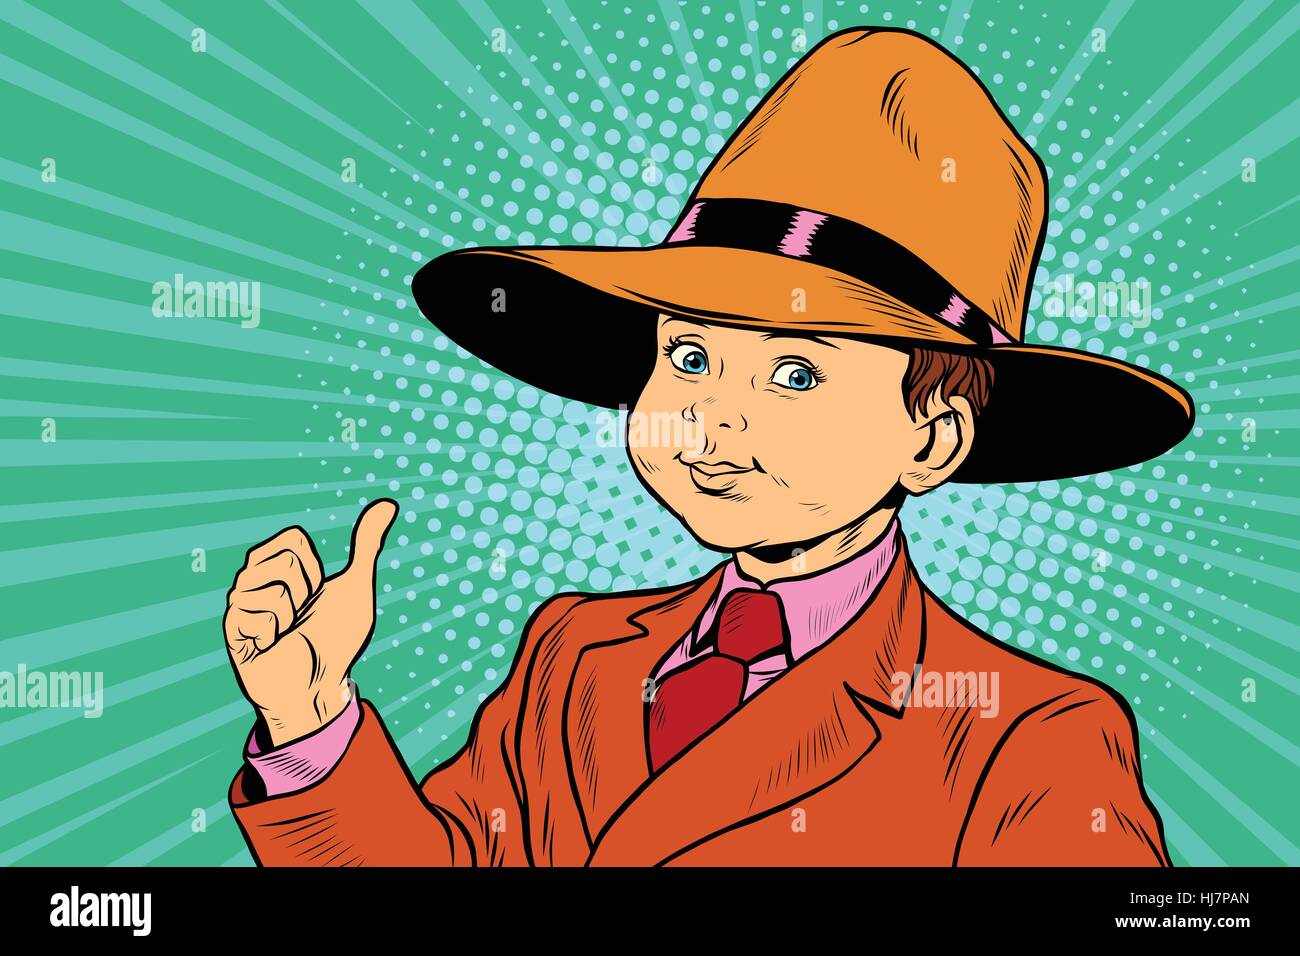 thumb up boy in a big hat Stock Vector